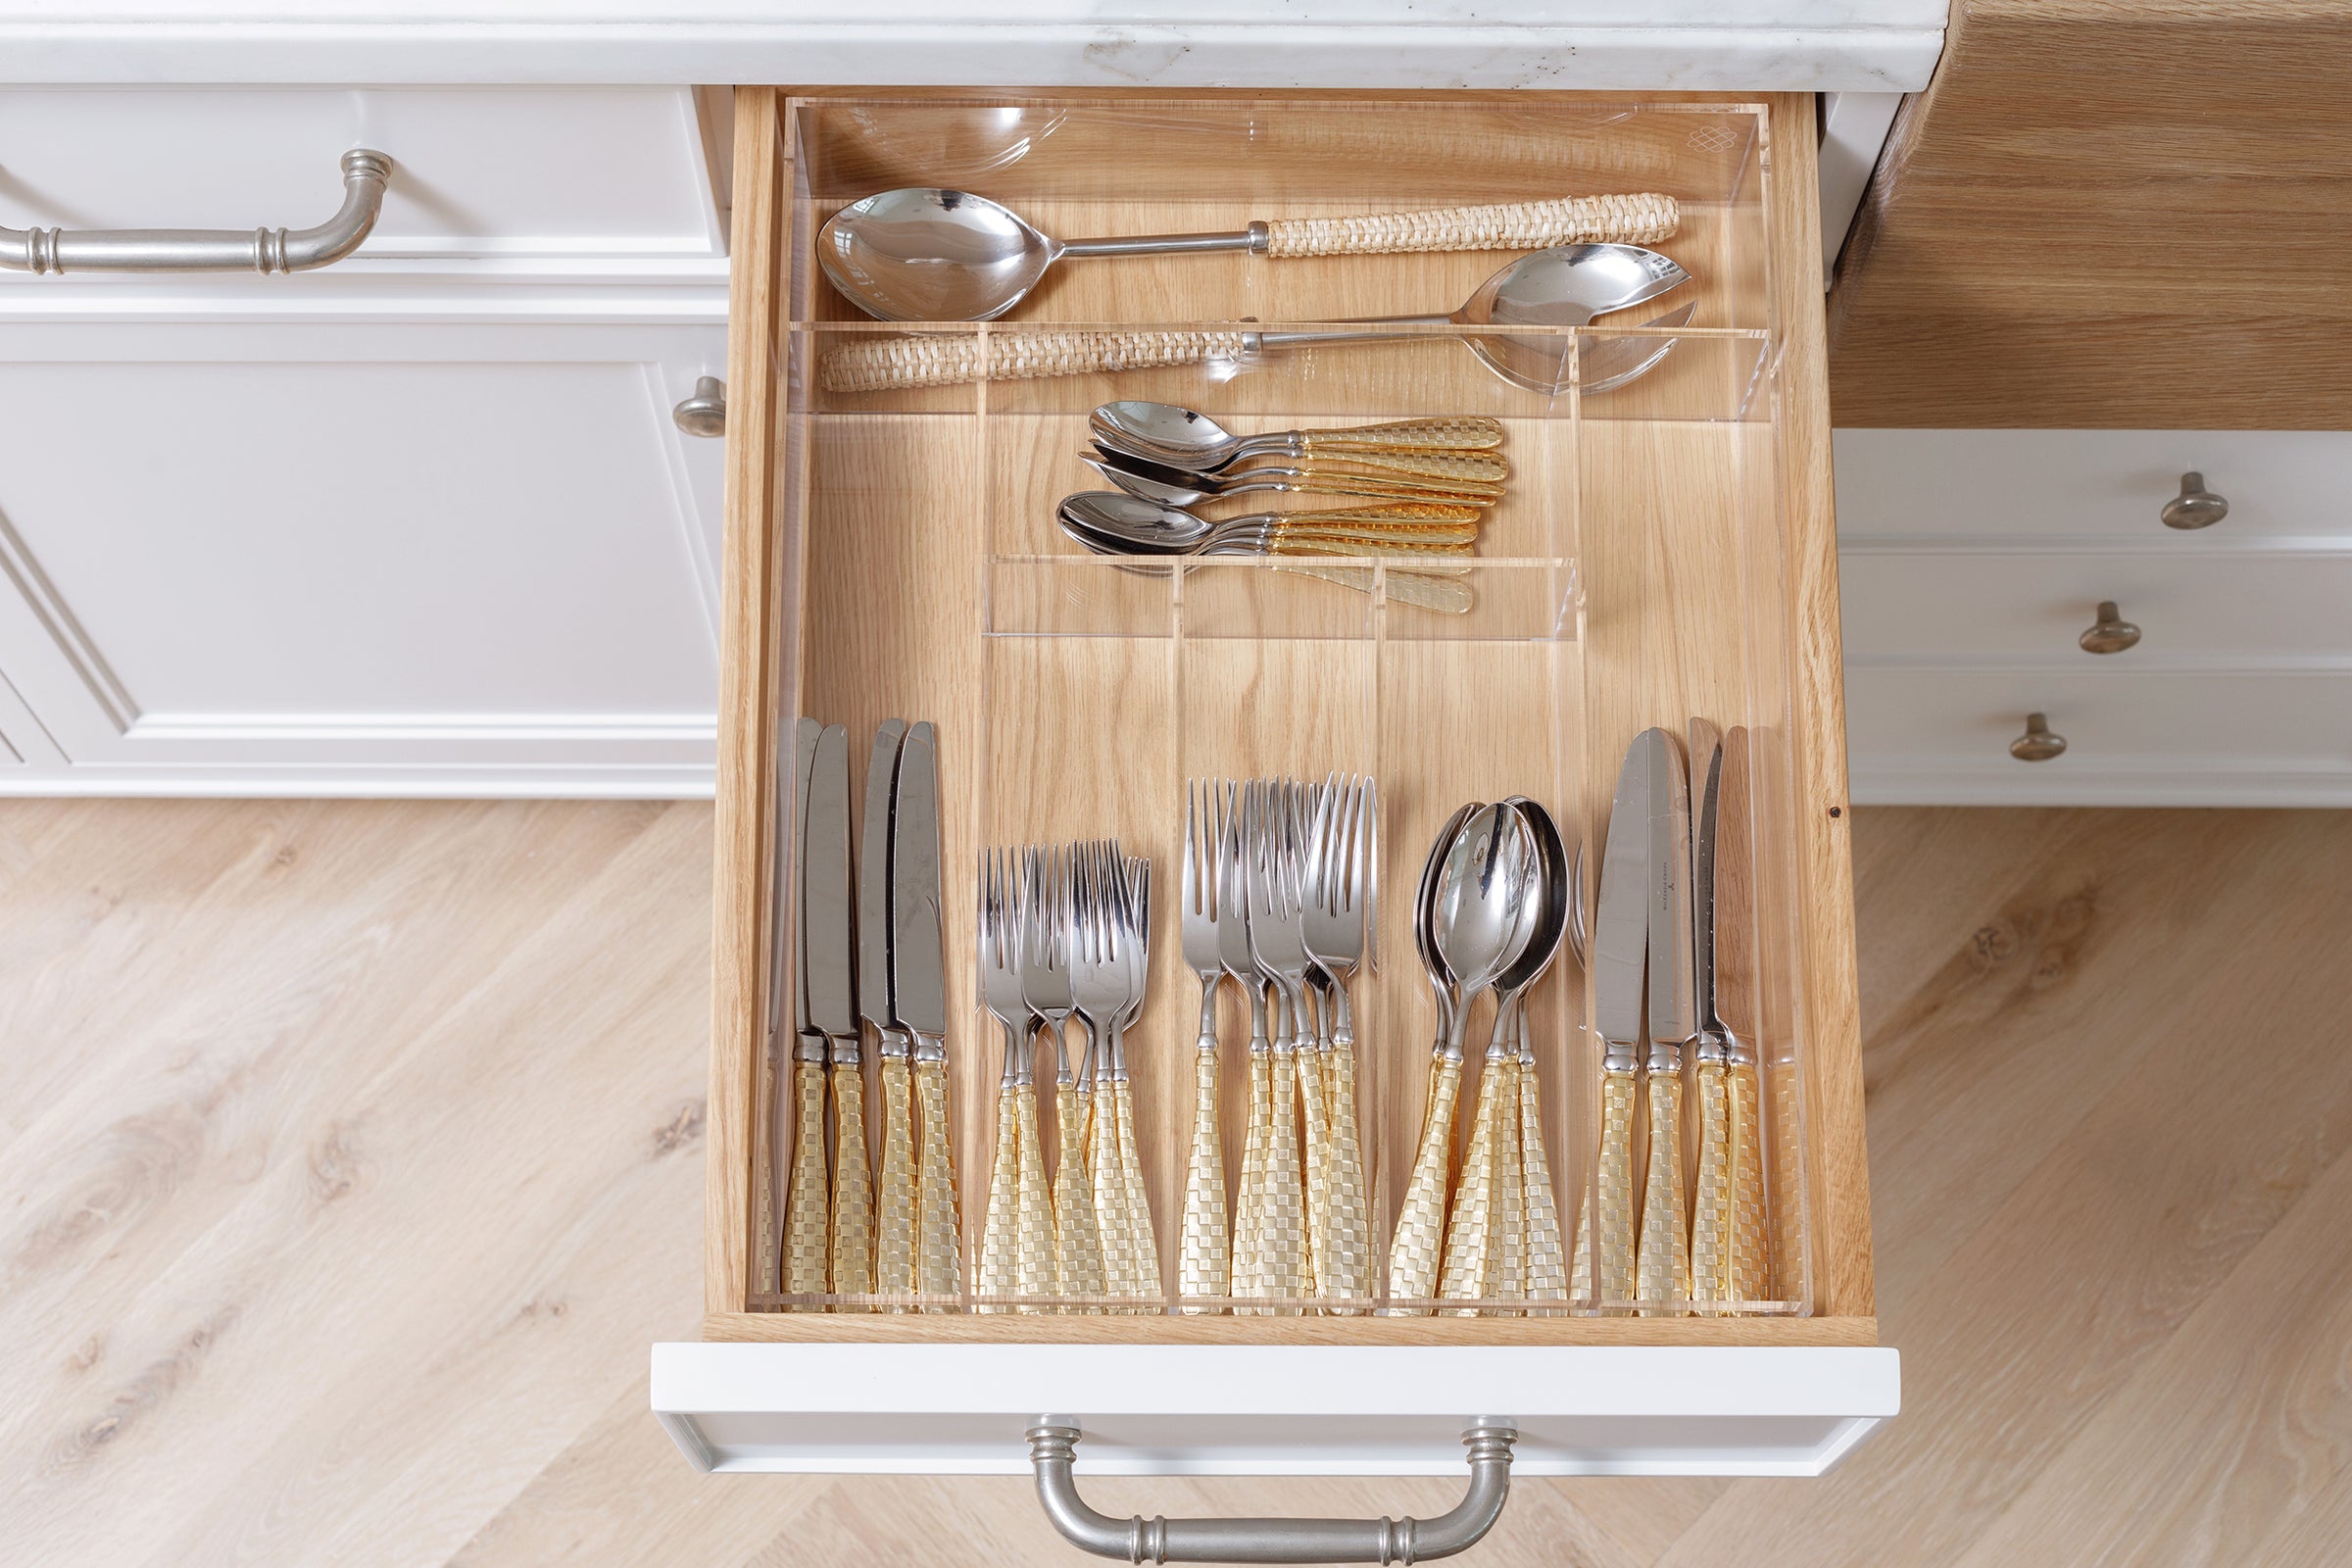 Custom Organizers Made to Fit your Drawers Perfectly